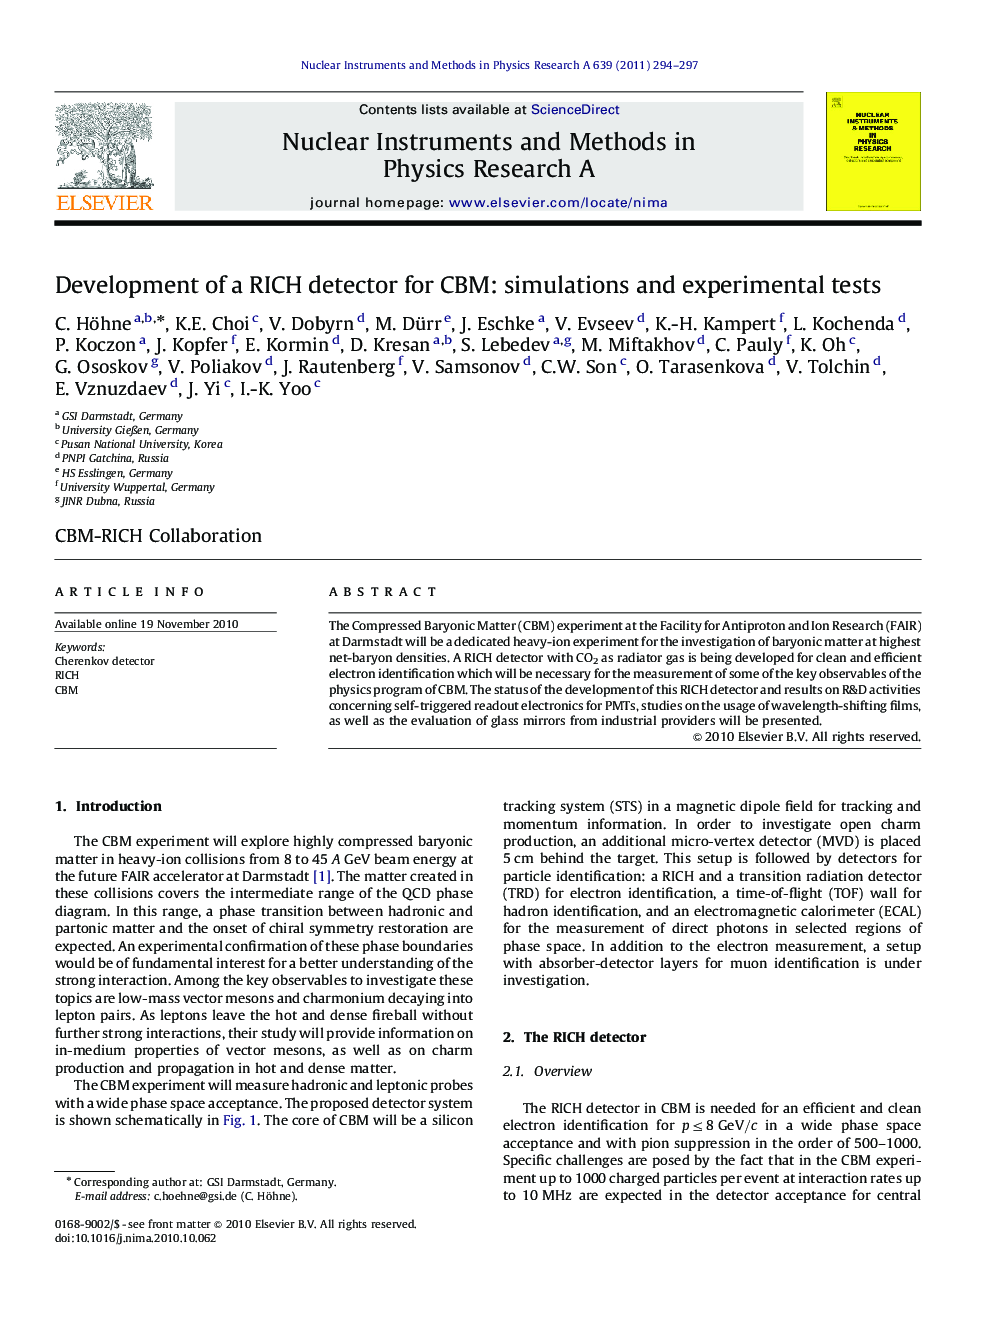 Development of a RICH detector for CBM: simulations and experimental tests